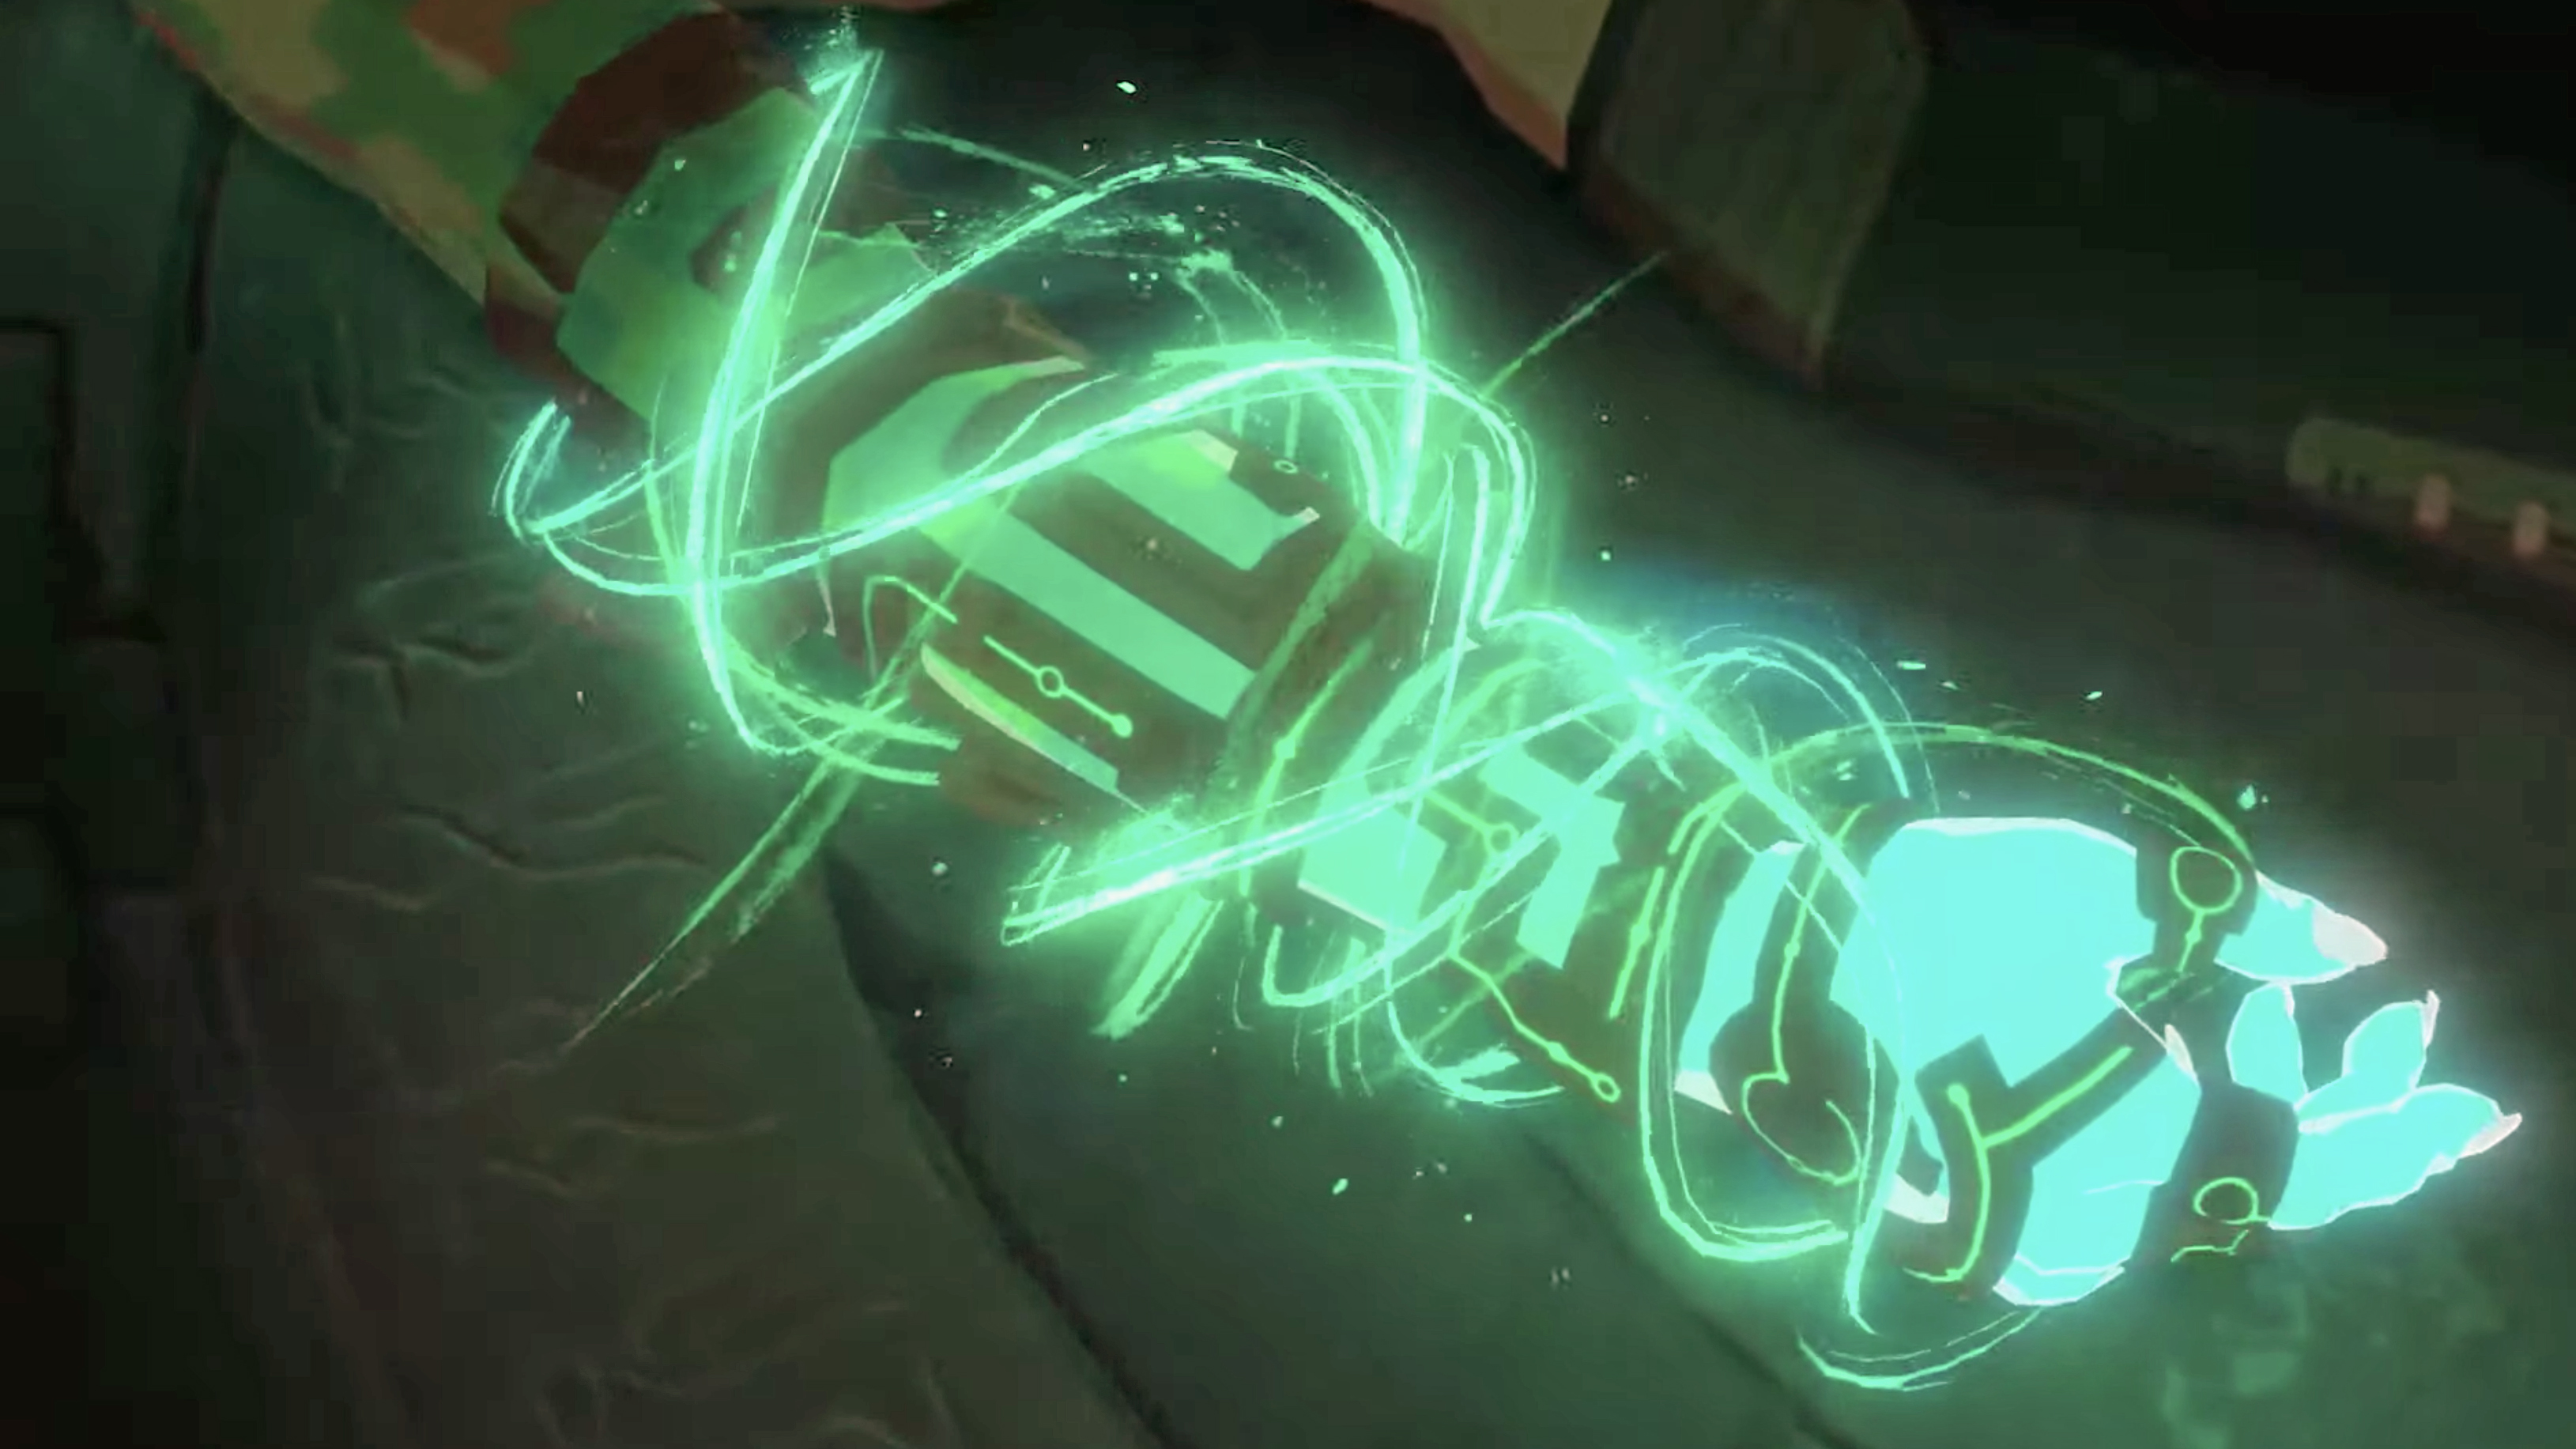 Breath of the Wild 2 trailer screenshot showing a new power glove item